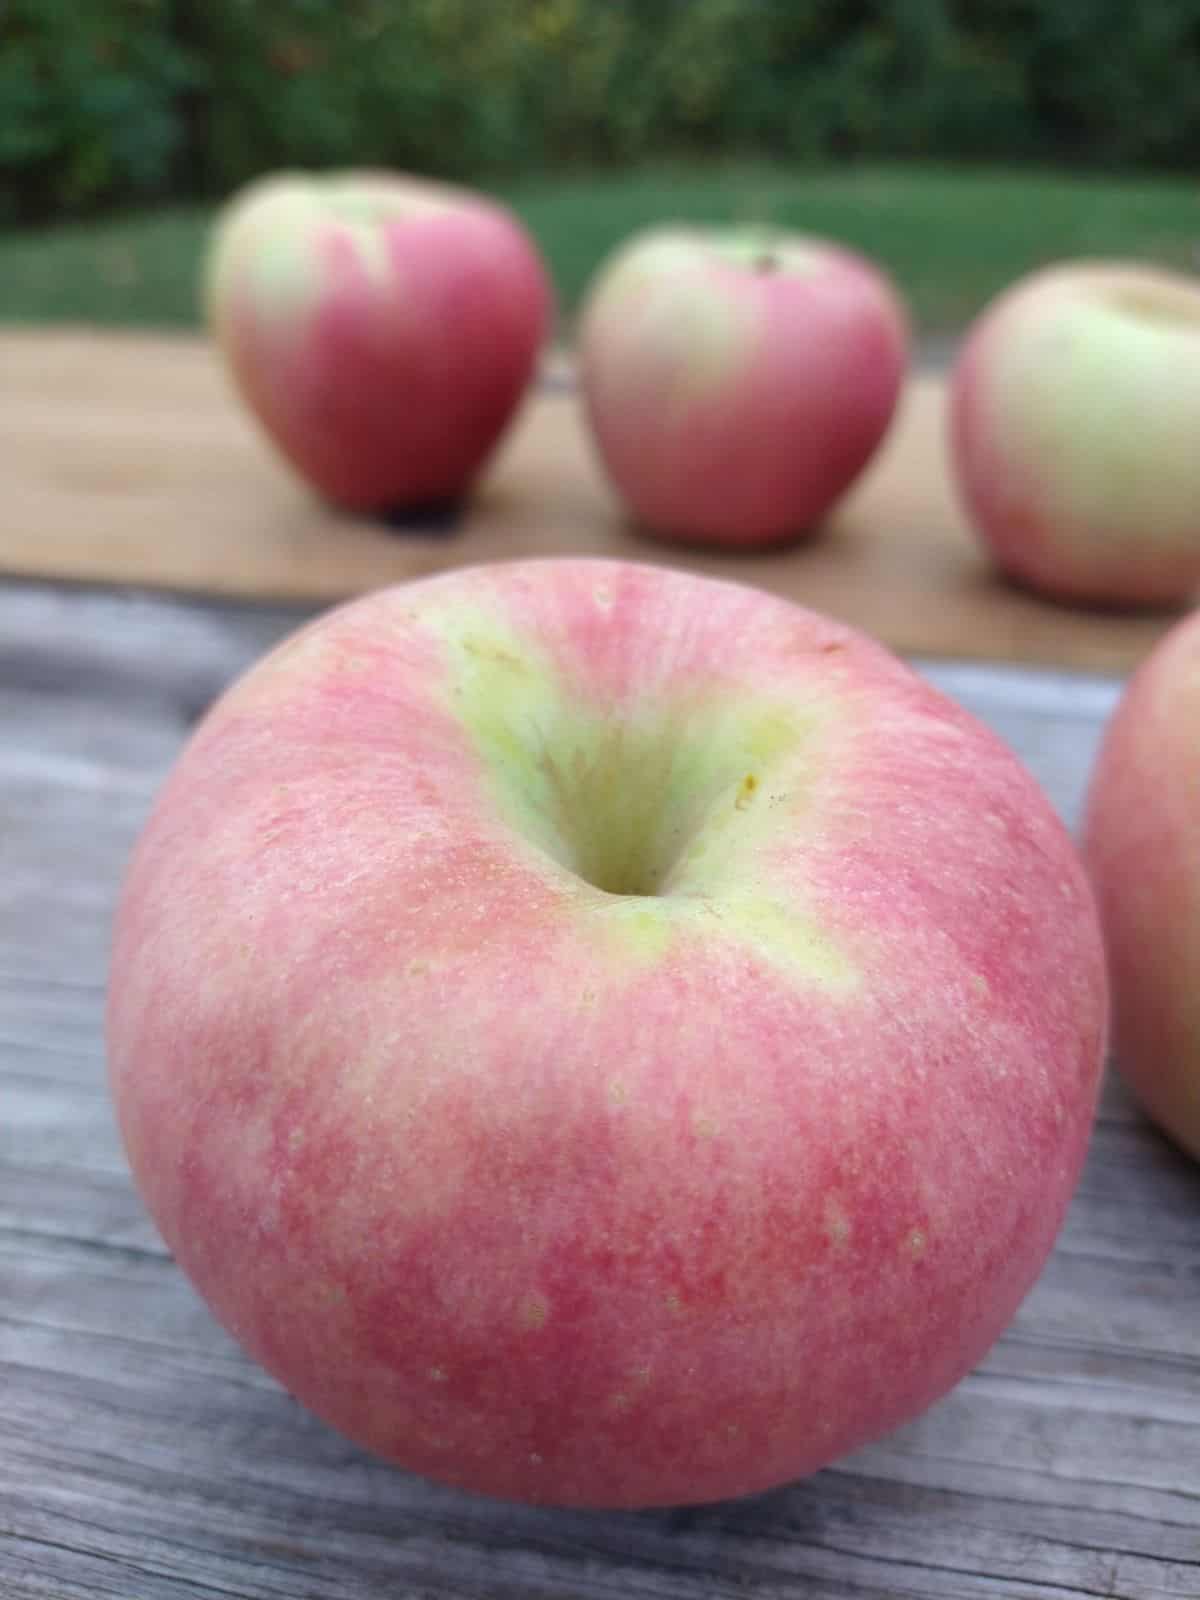 Sweet Zinger apples siting on a wood picnic table outside.